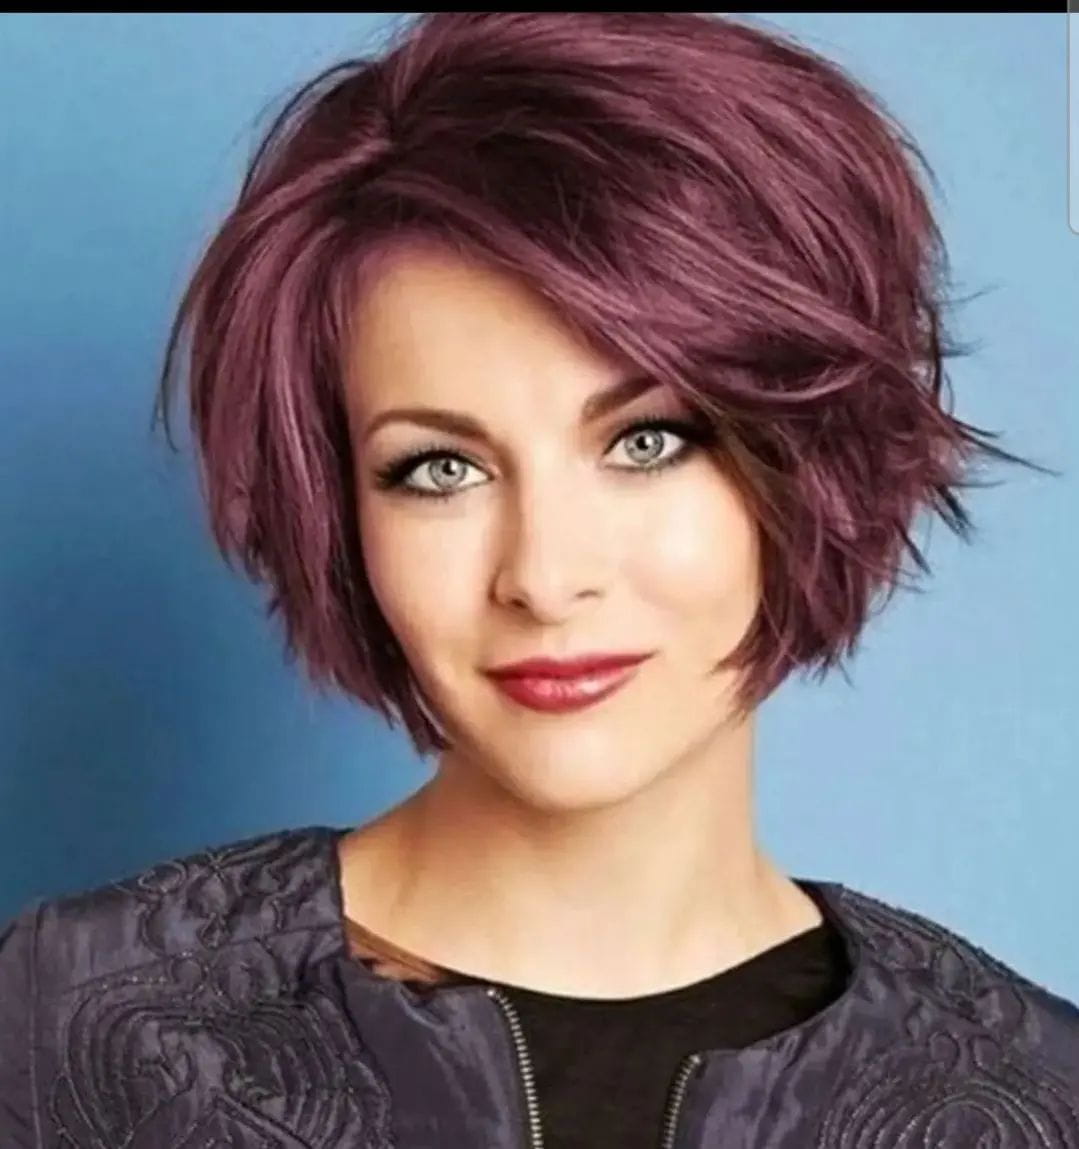 100+ Best Short Hairstyles & Haircuts For Women In 2023 images 95